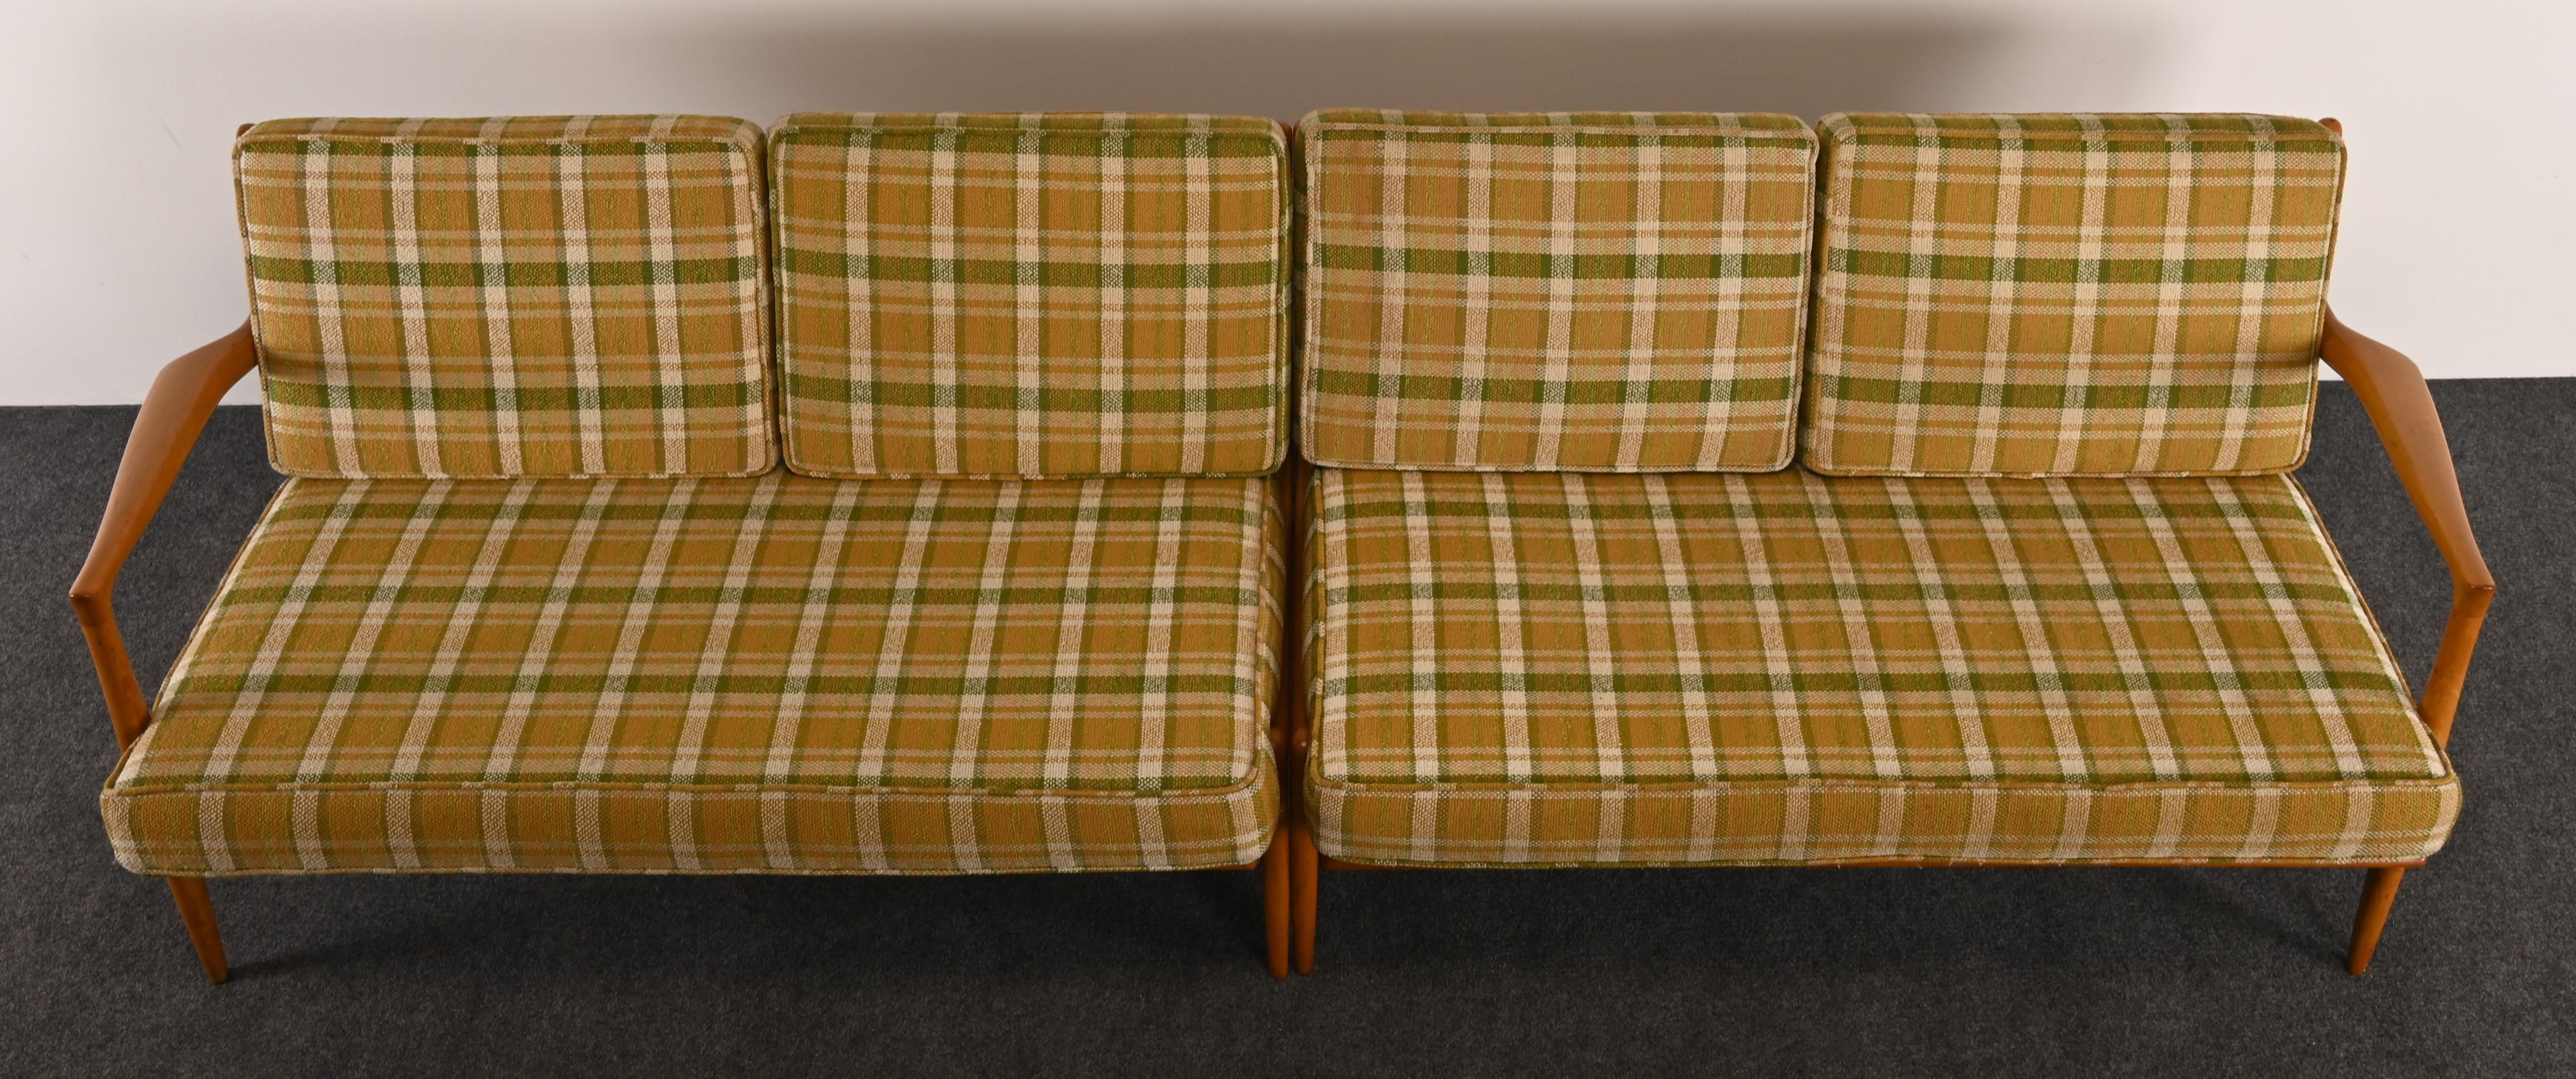 Upholstery Two-Piece Sectional Sofa by Ib Kofod-Larsen for Selig, 1960s